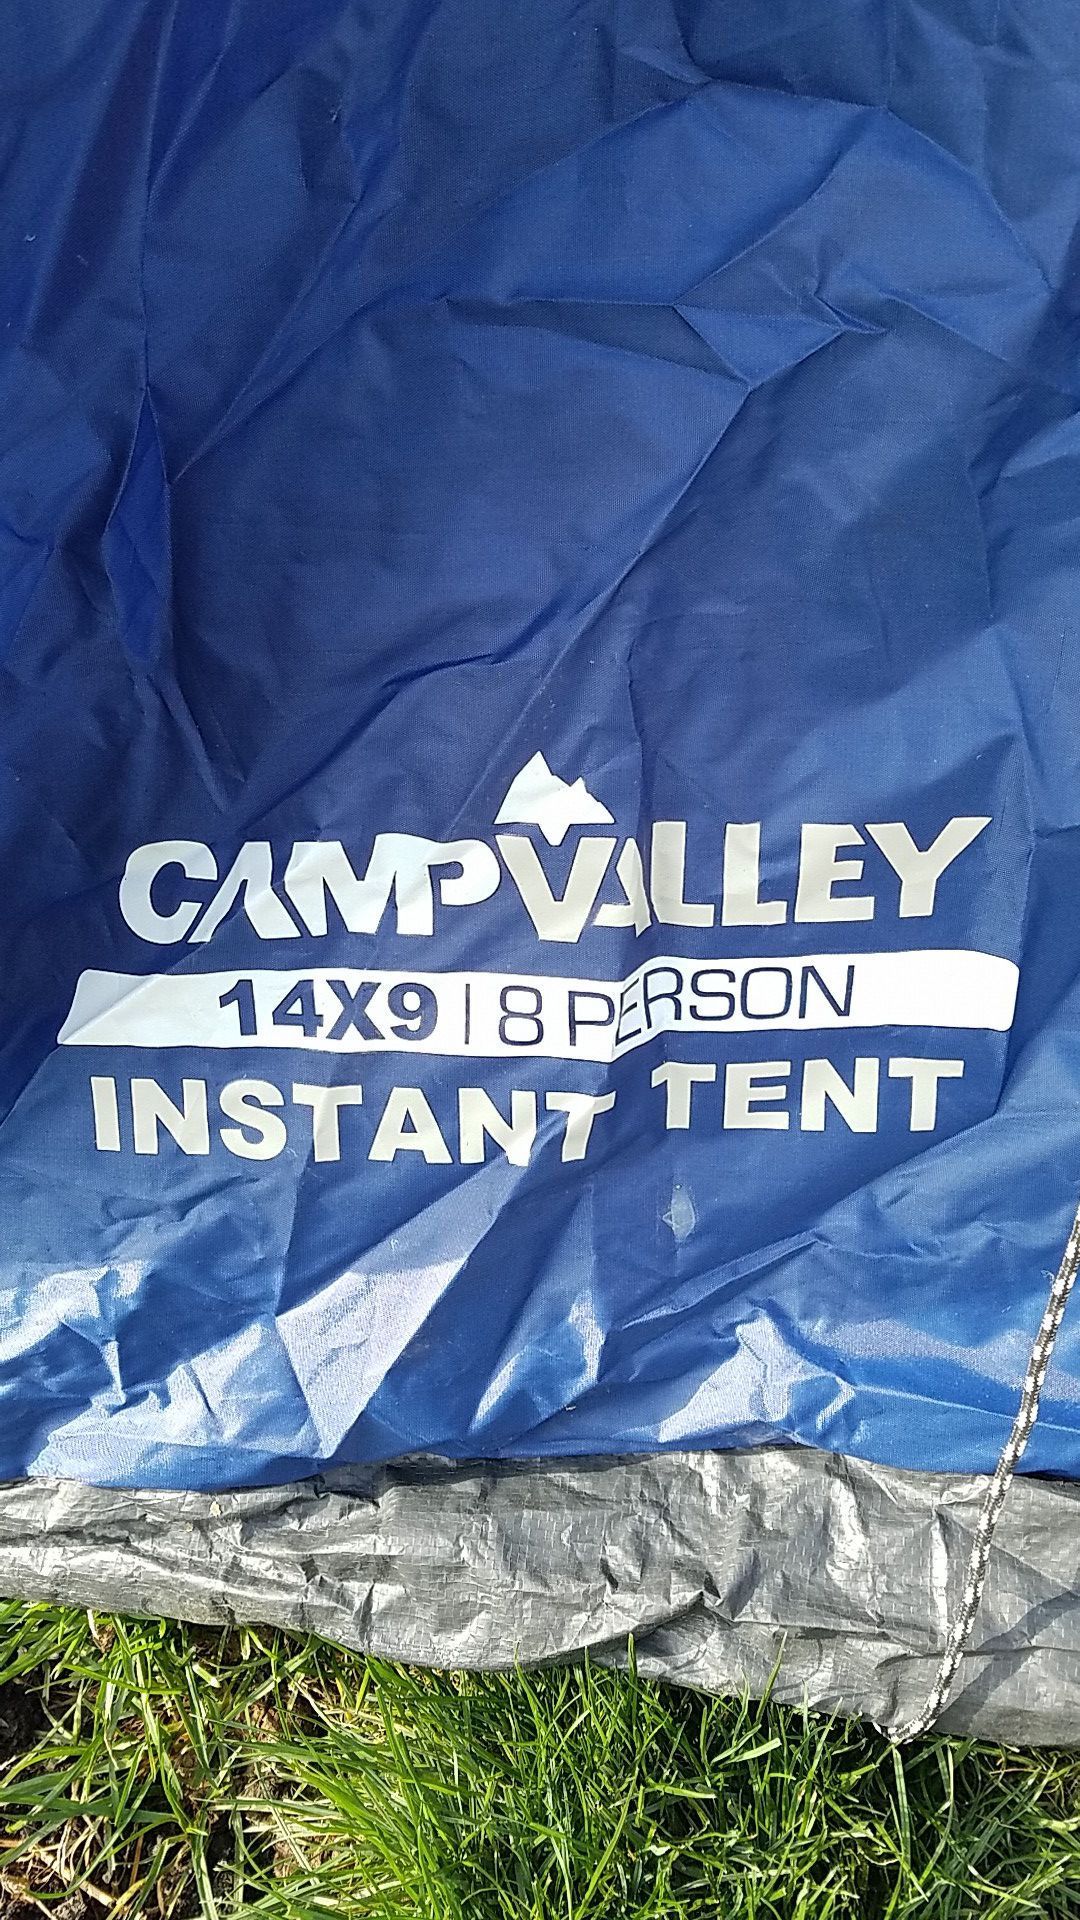 Camp Valley 14x9 - 8 person tent